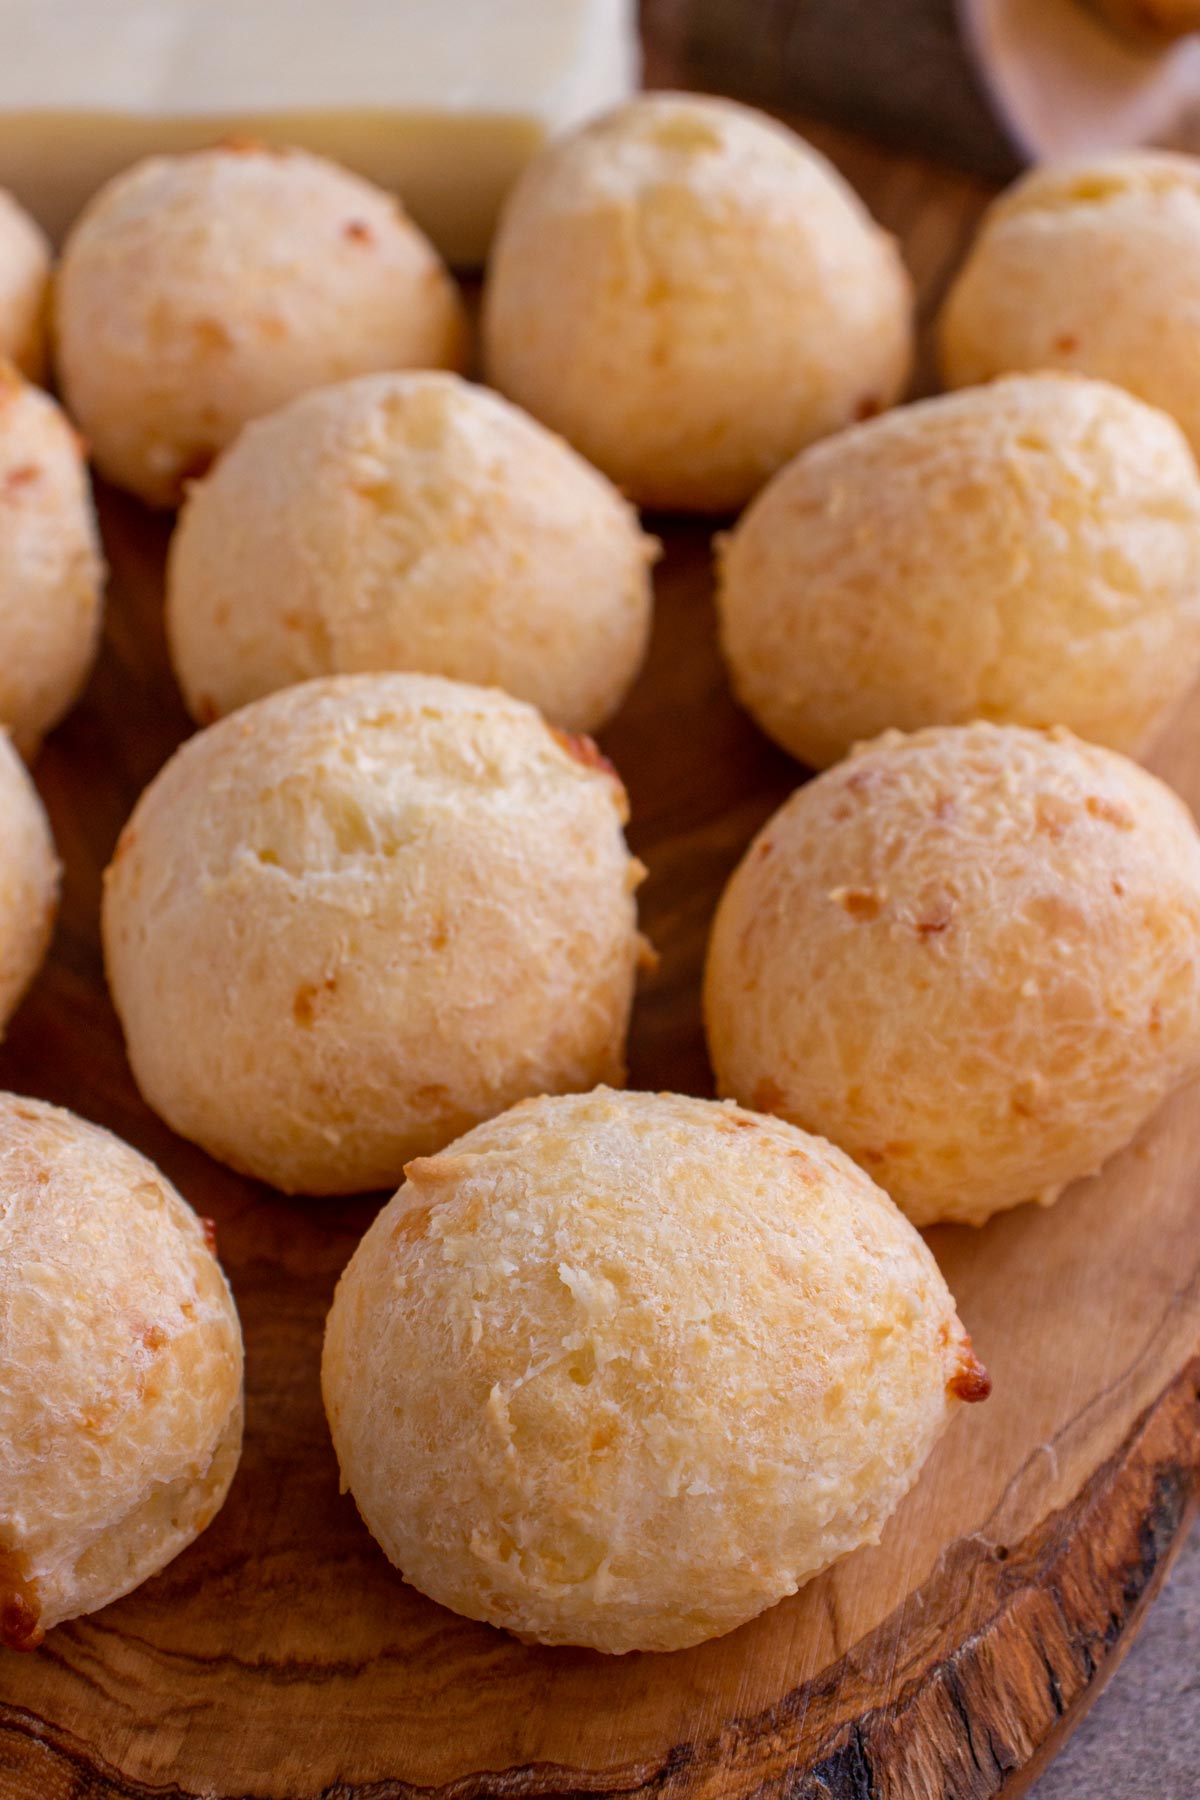 Closeup of small spherical Brazilian cheese breads arranged on a wooden board.